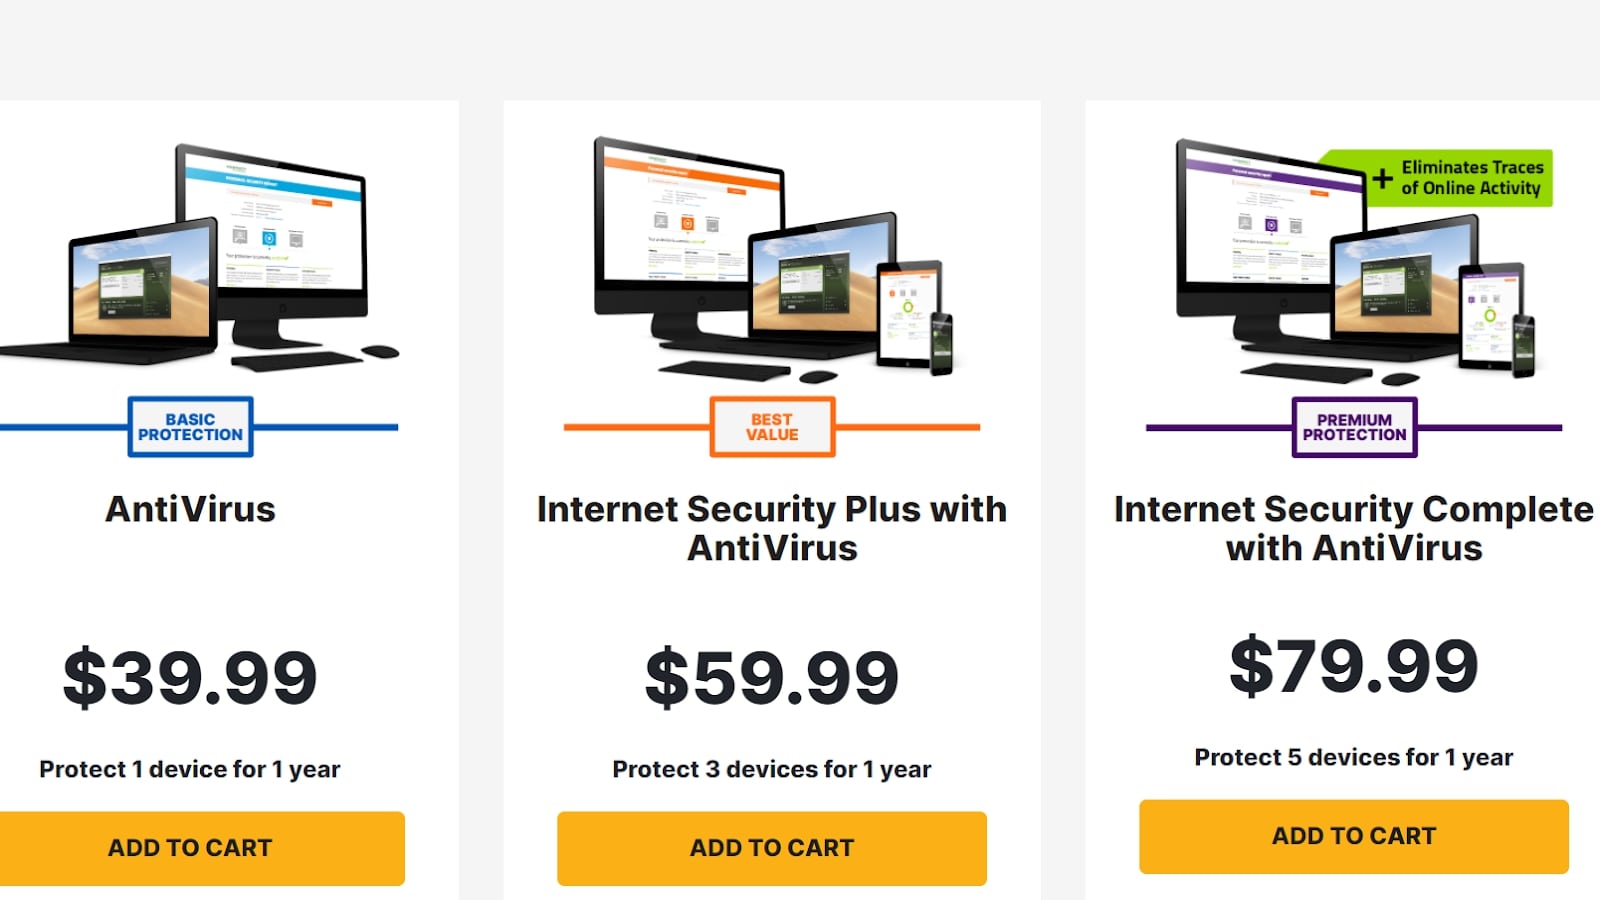 Webroot SecureAnywhere Internet Security Complete free